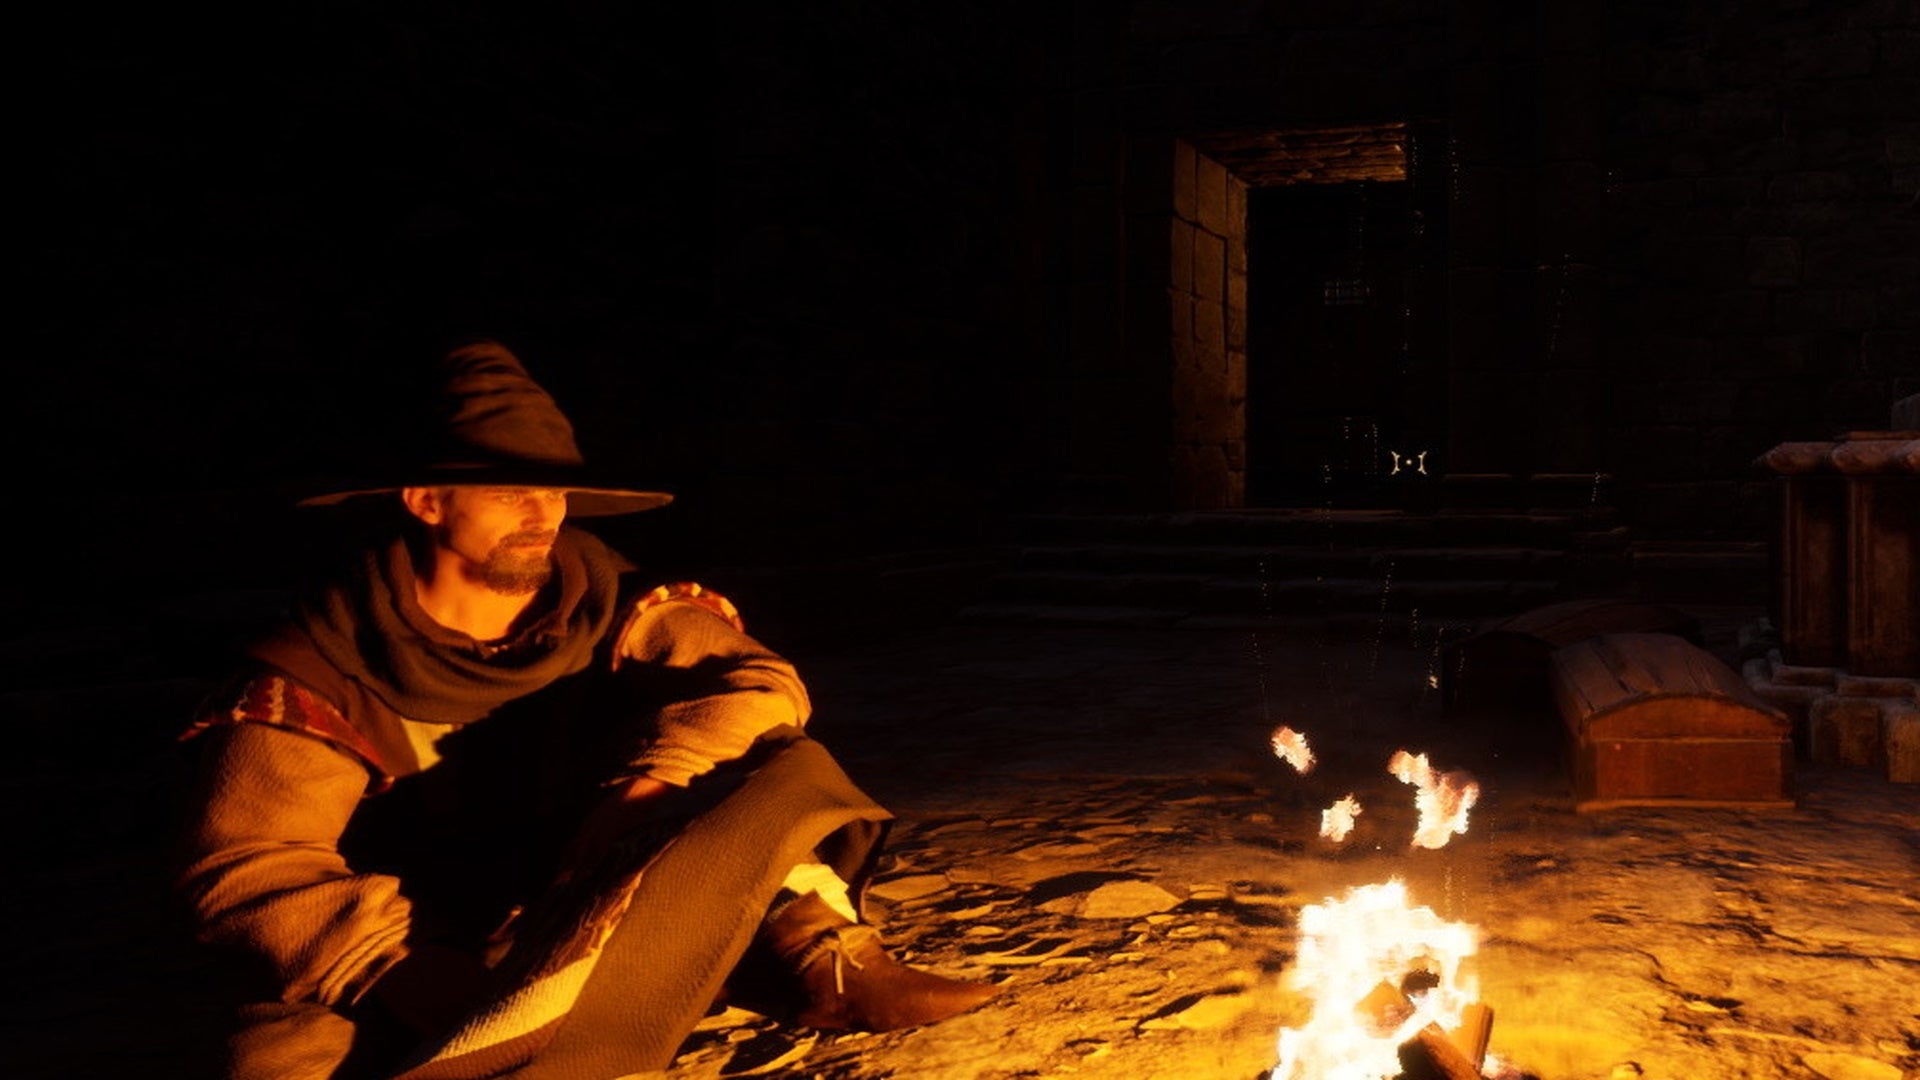 How to extract in Dark and Darker: A crudely animated man wearing a brown cloth shirt and trousers is sitting on a dirt floor near a small campfire. Darkness surrounds him